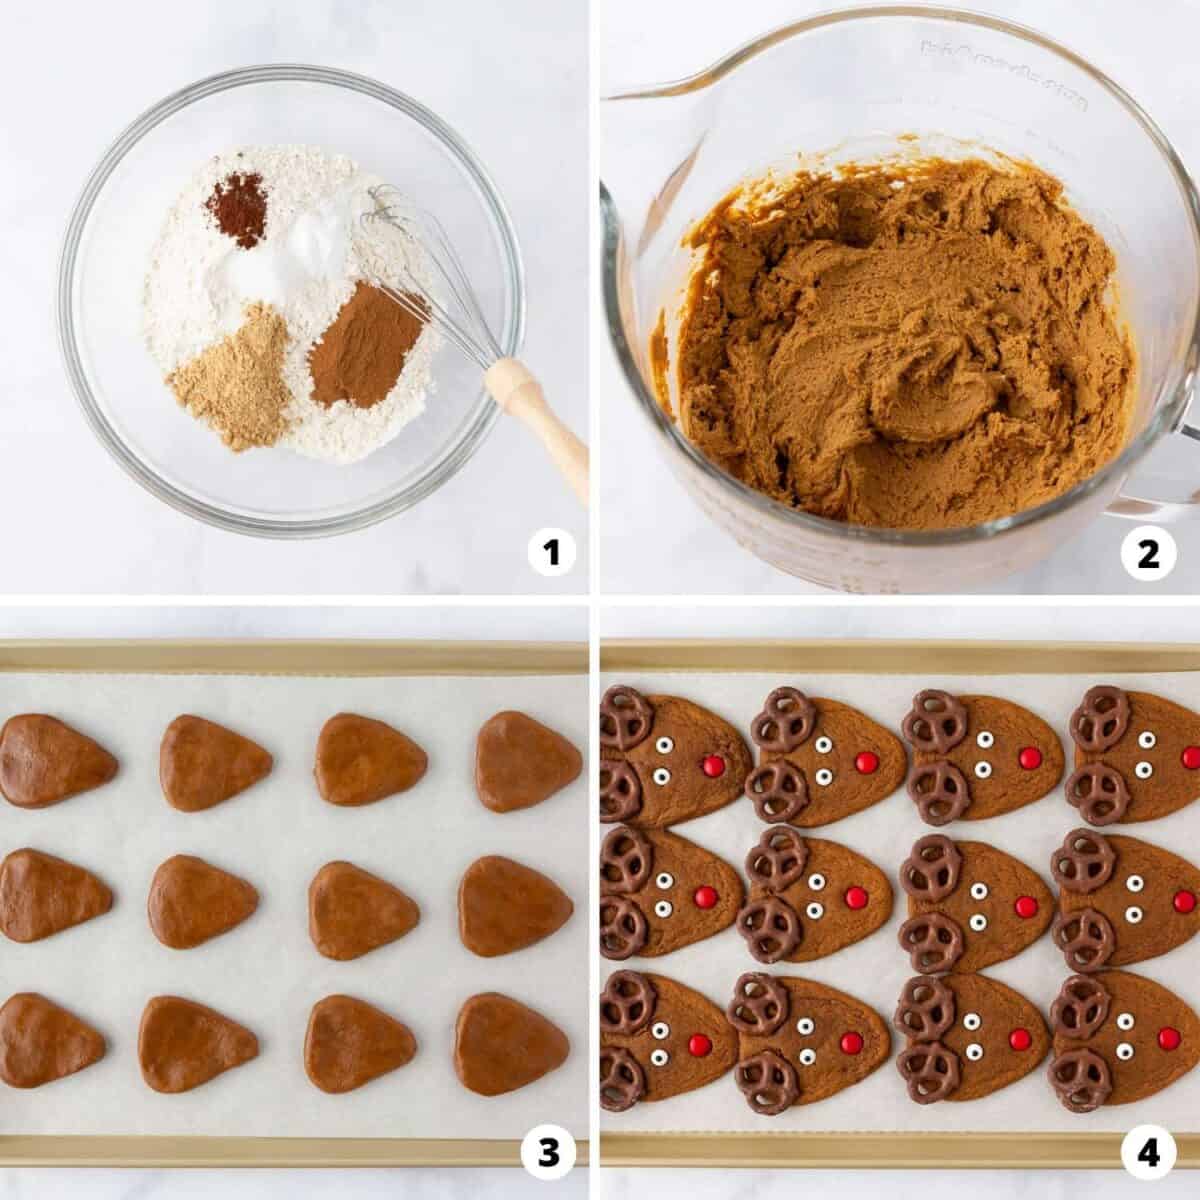 Showing how to make reindeer cookies in a 4 step collage.